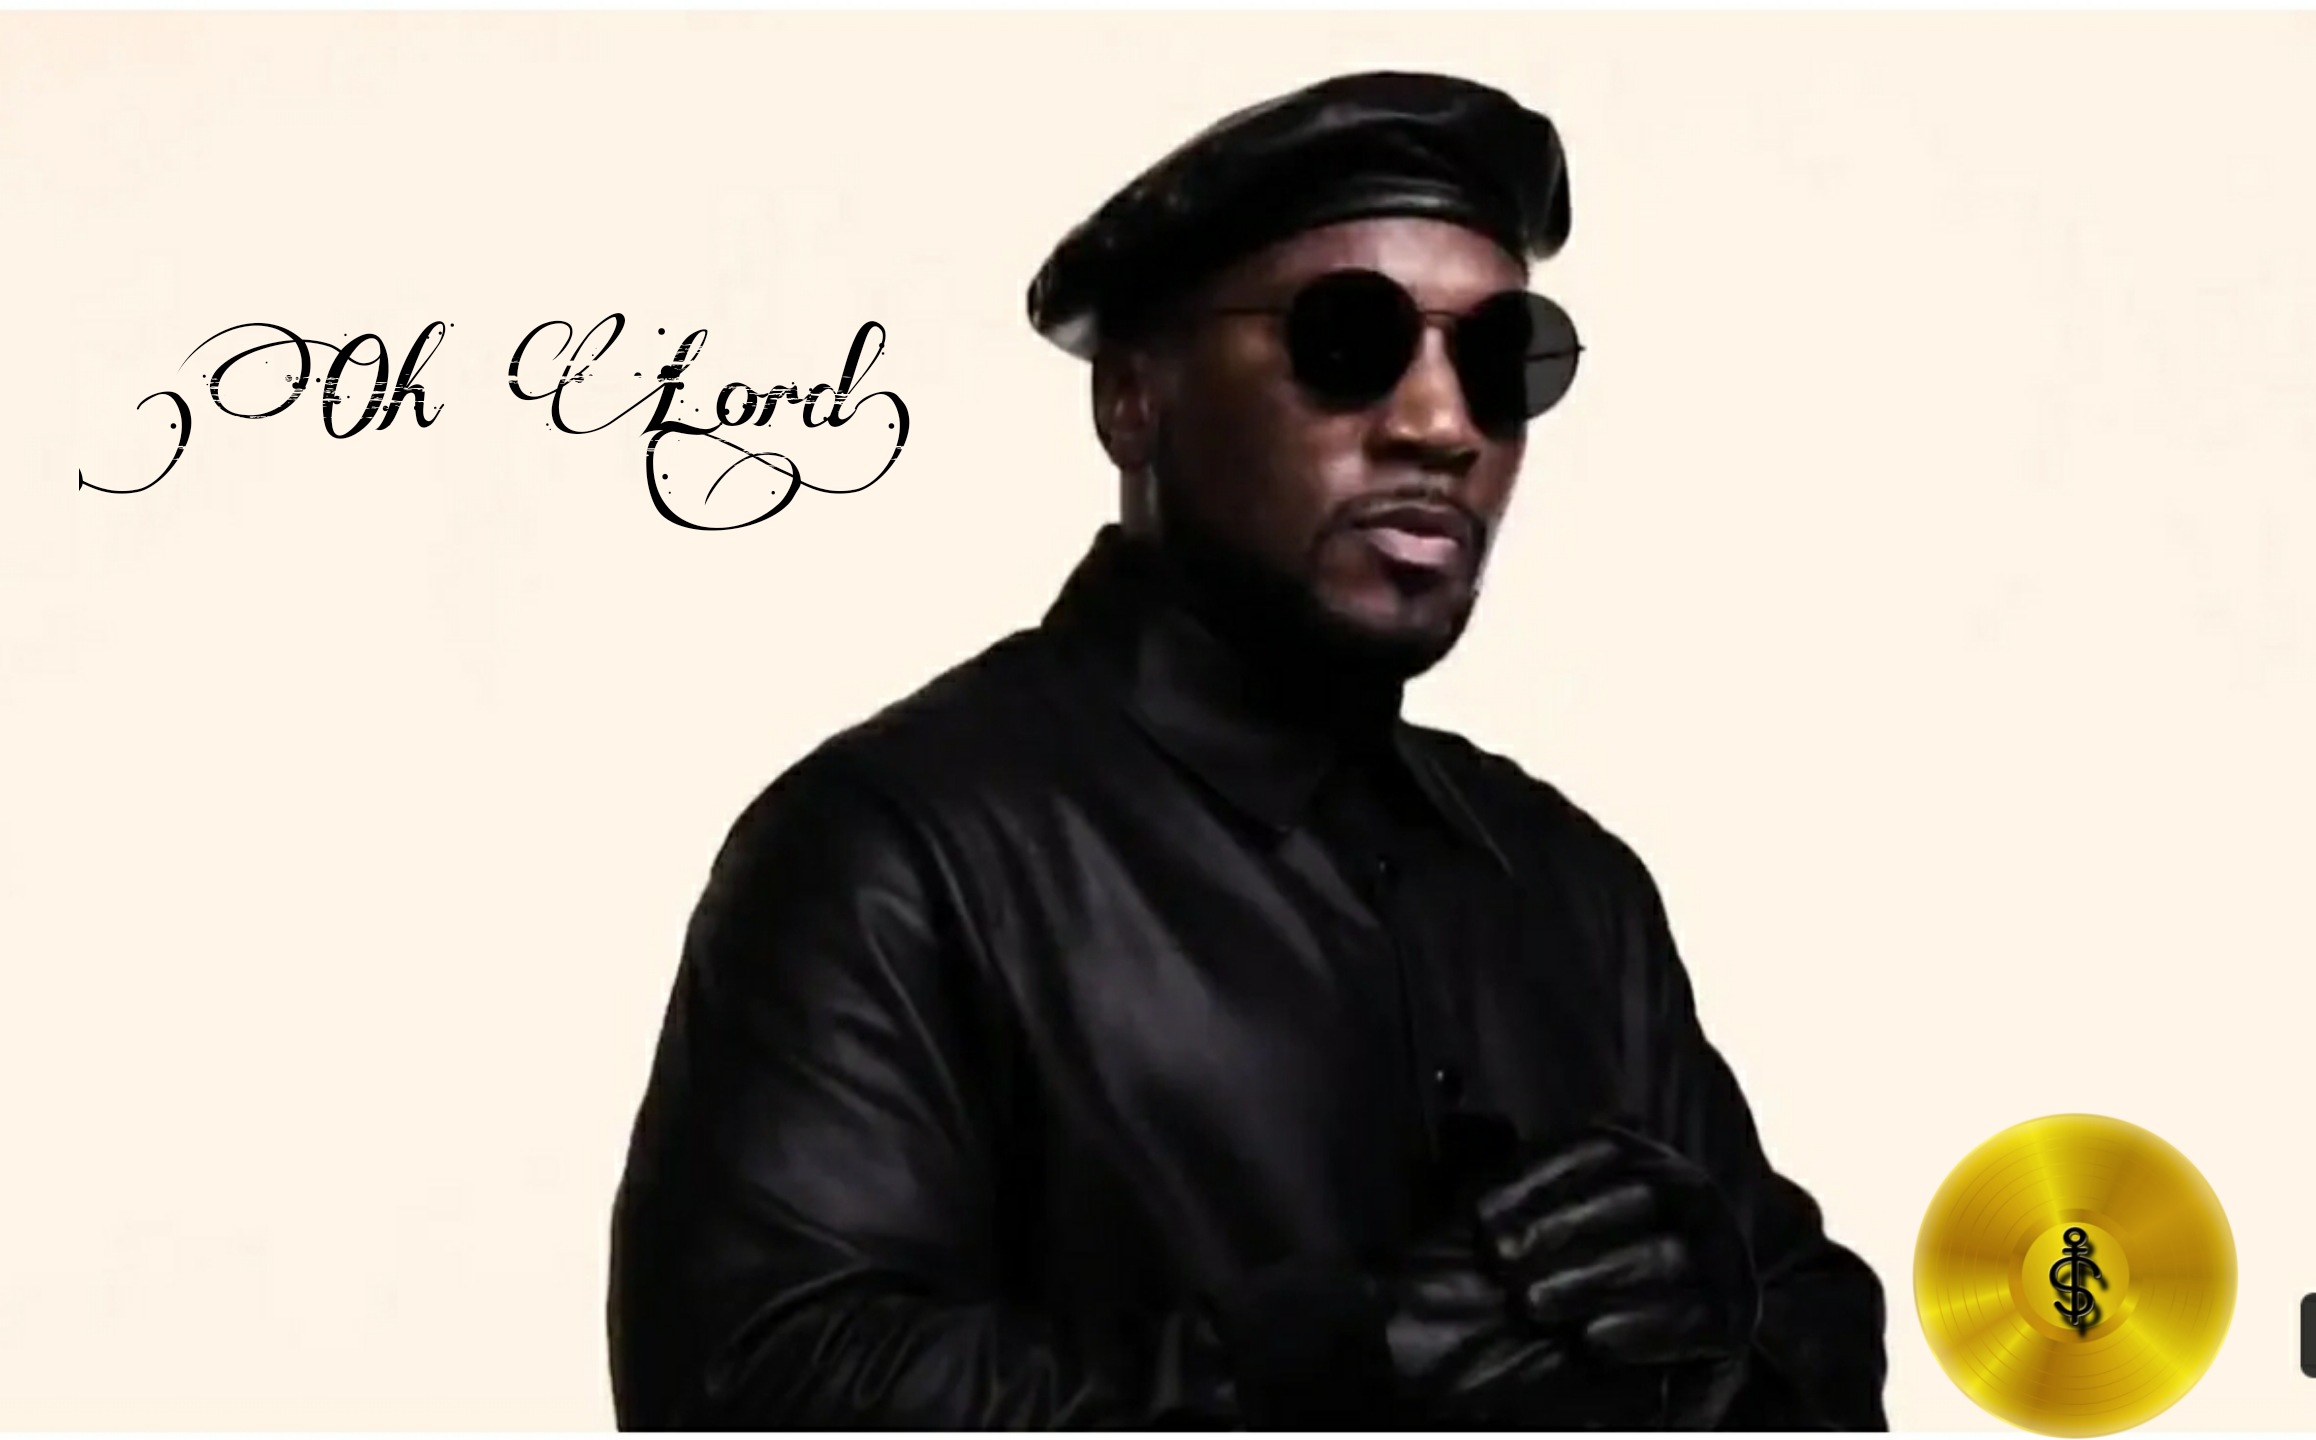 JEEZY DROPS “OH LORD” TRAILER AHEAD OF RECESSION 2 RELEASE